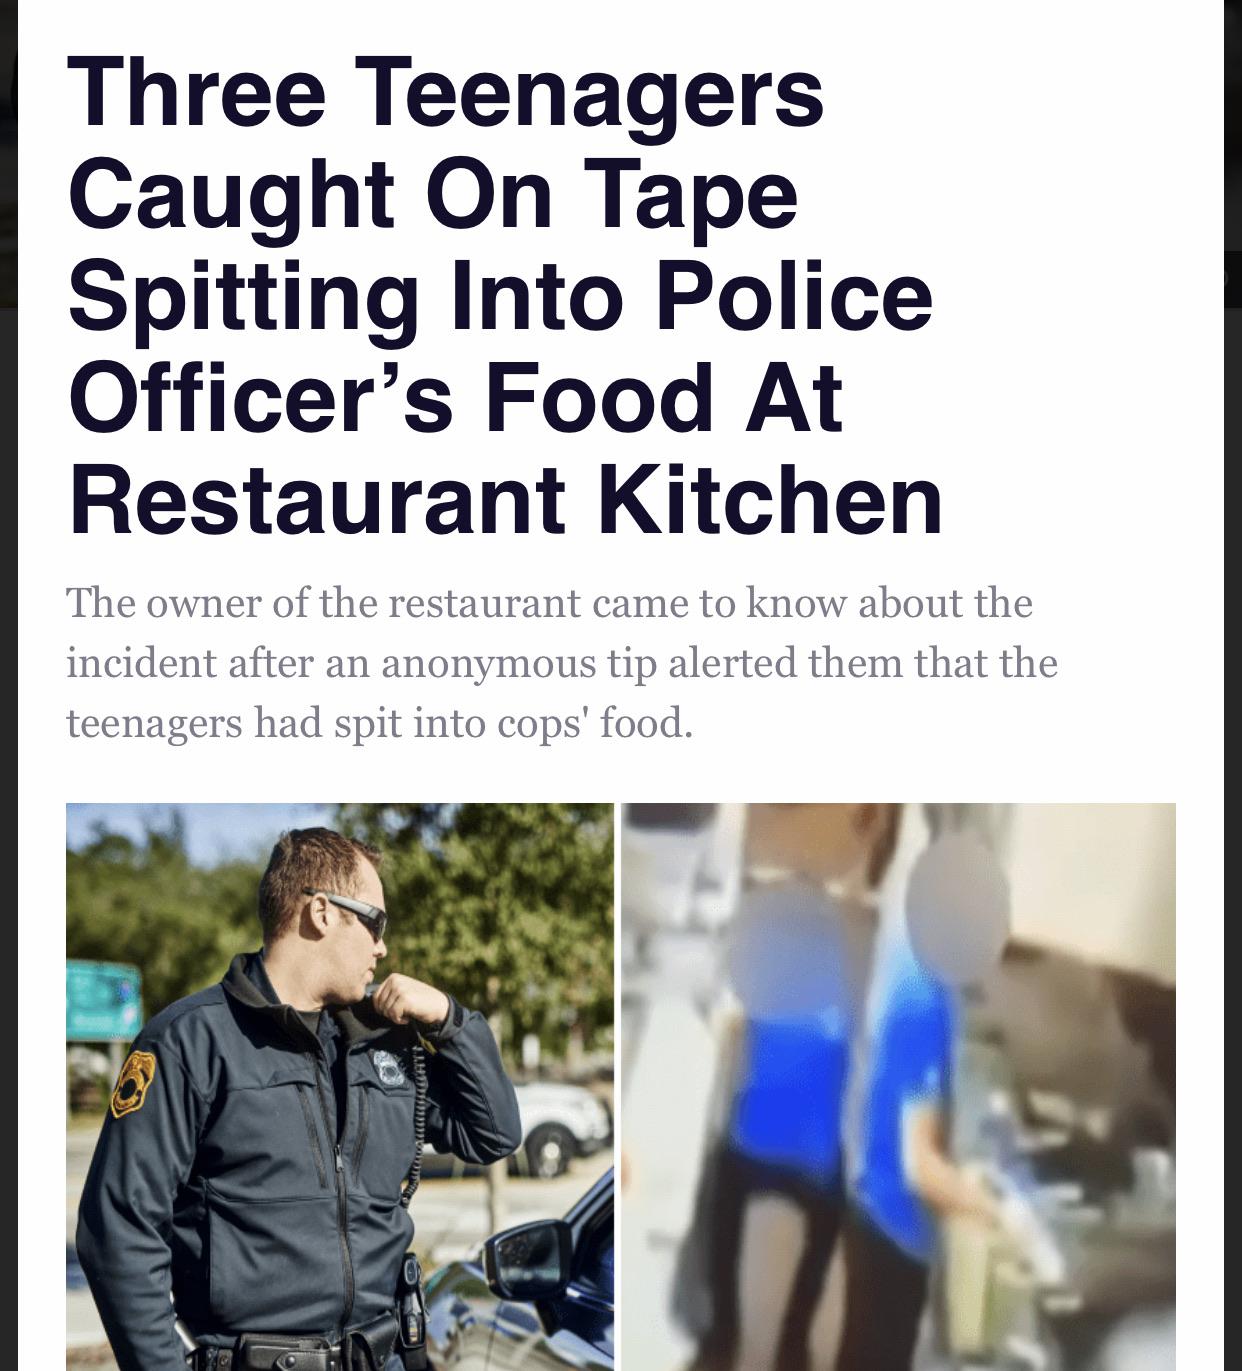 water - Three Teenagers Caught On Tape Spitting Into Police Officer's Food At Restaurant Kitchen The owner of the restaurant came to know about the incident after an anonymous tip alerted them that the teenagers had spit into cops' food.